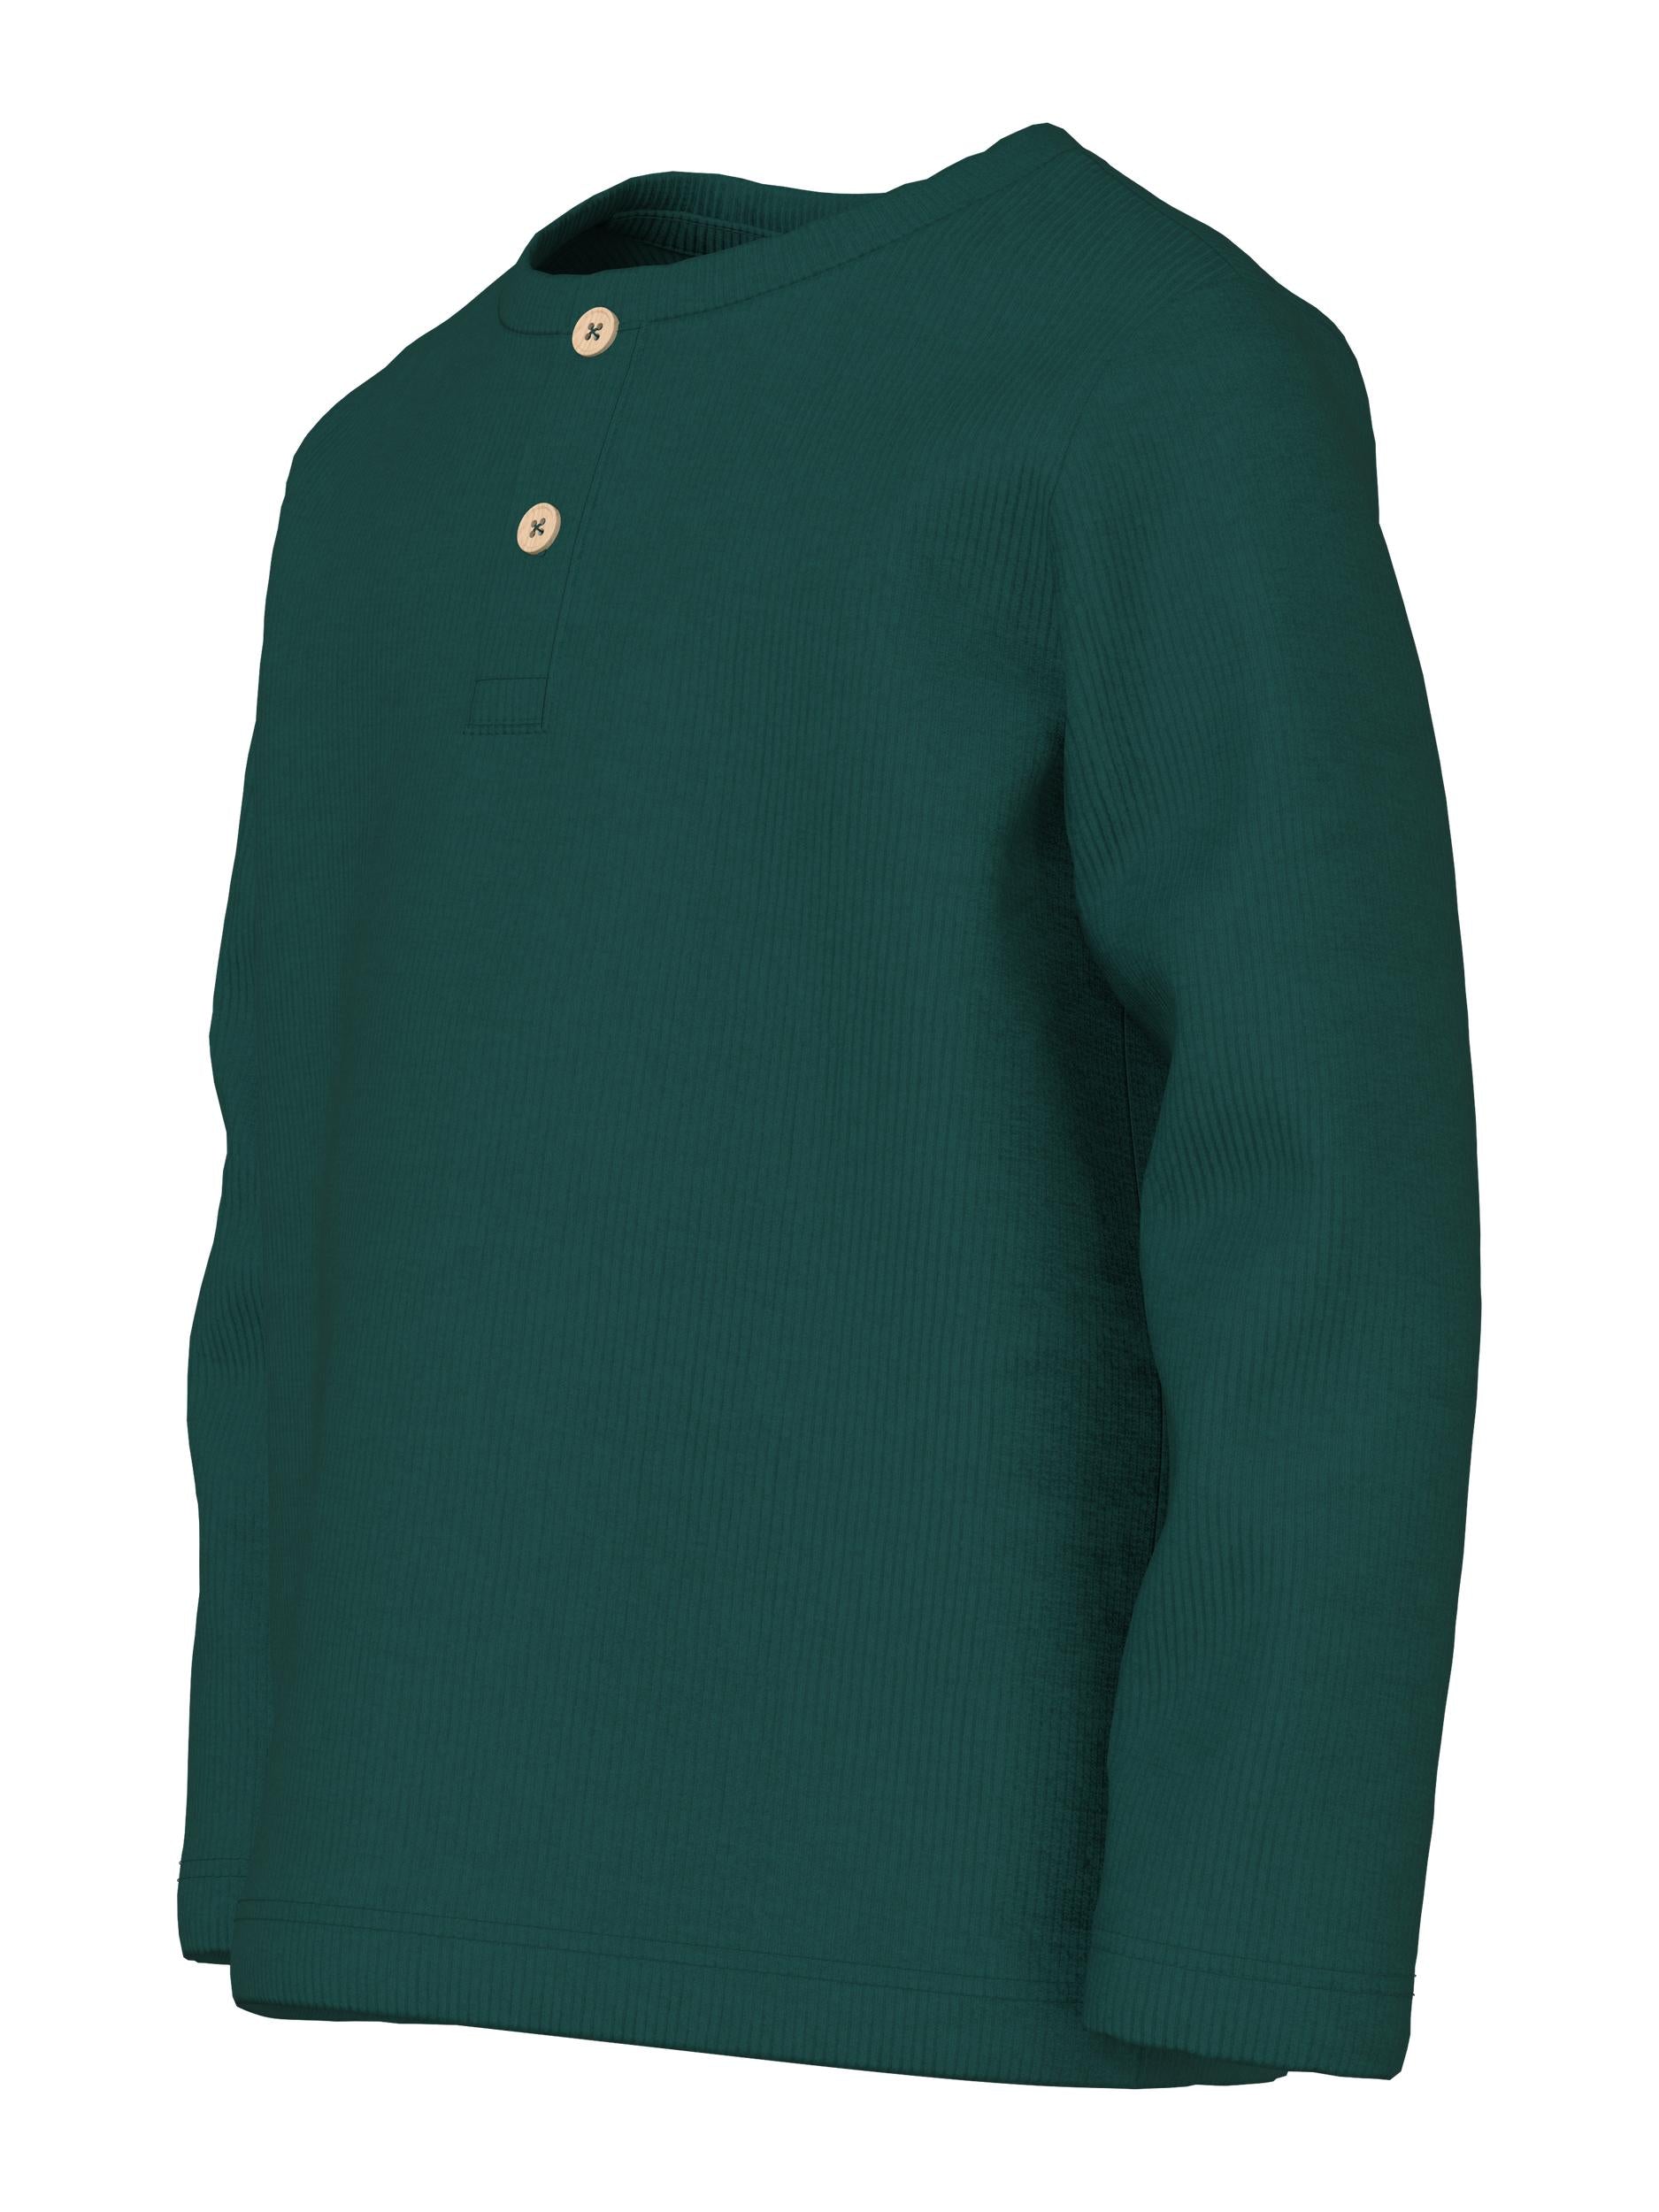 Boy's Ricco Long Sleeve Top-Forest Biome-Side View